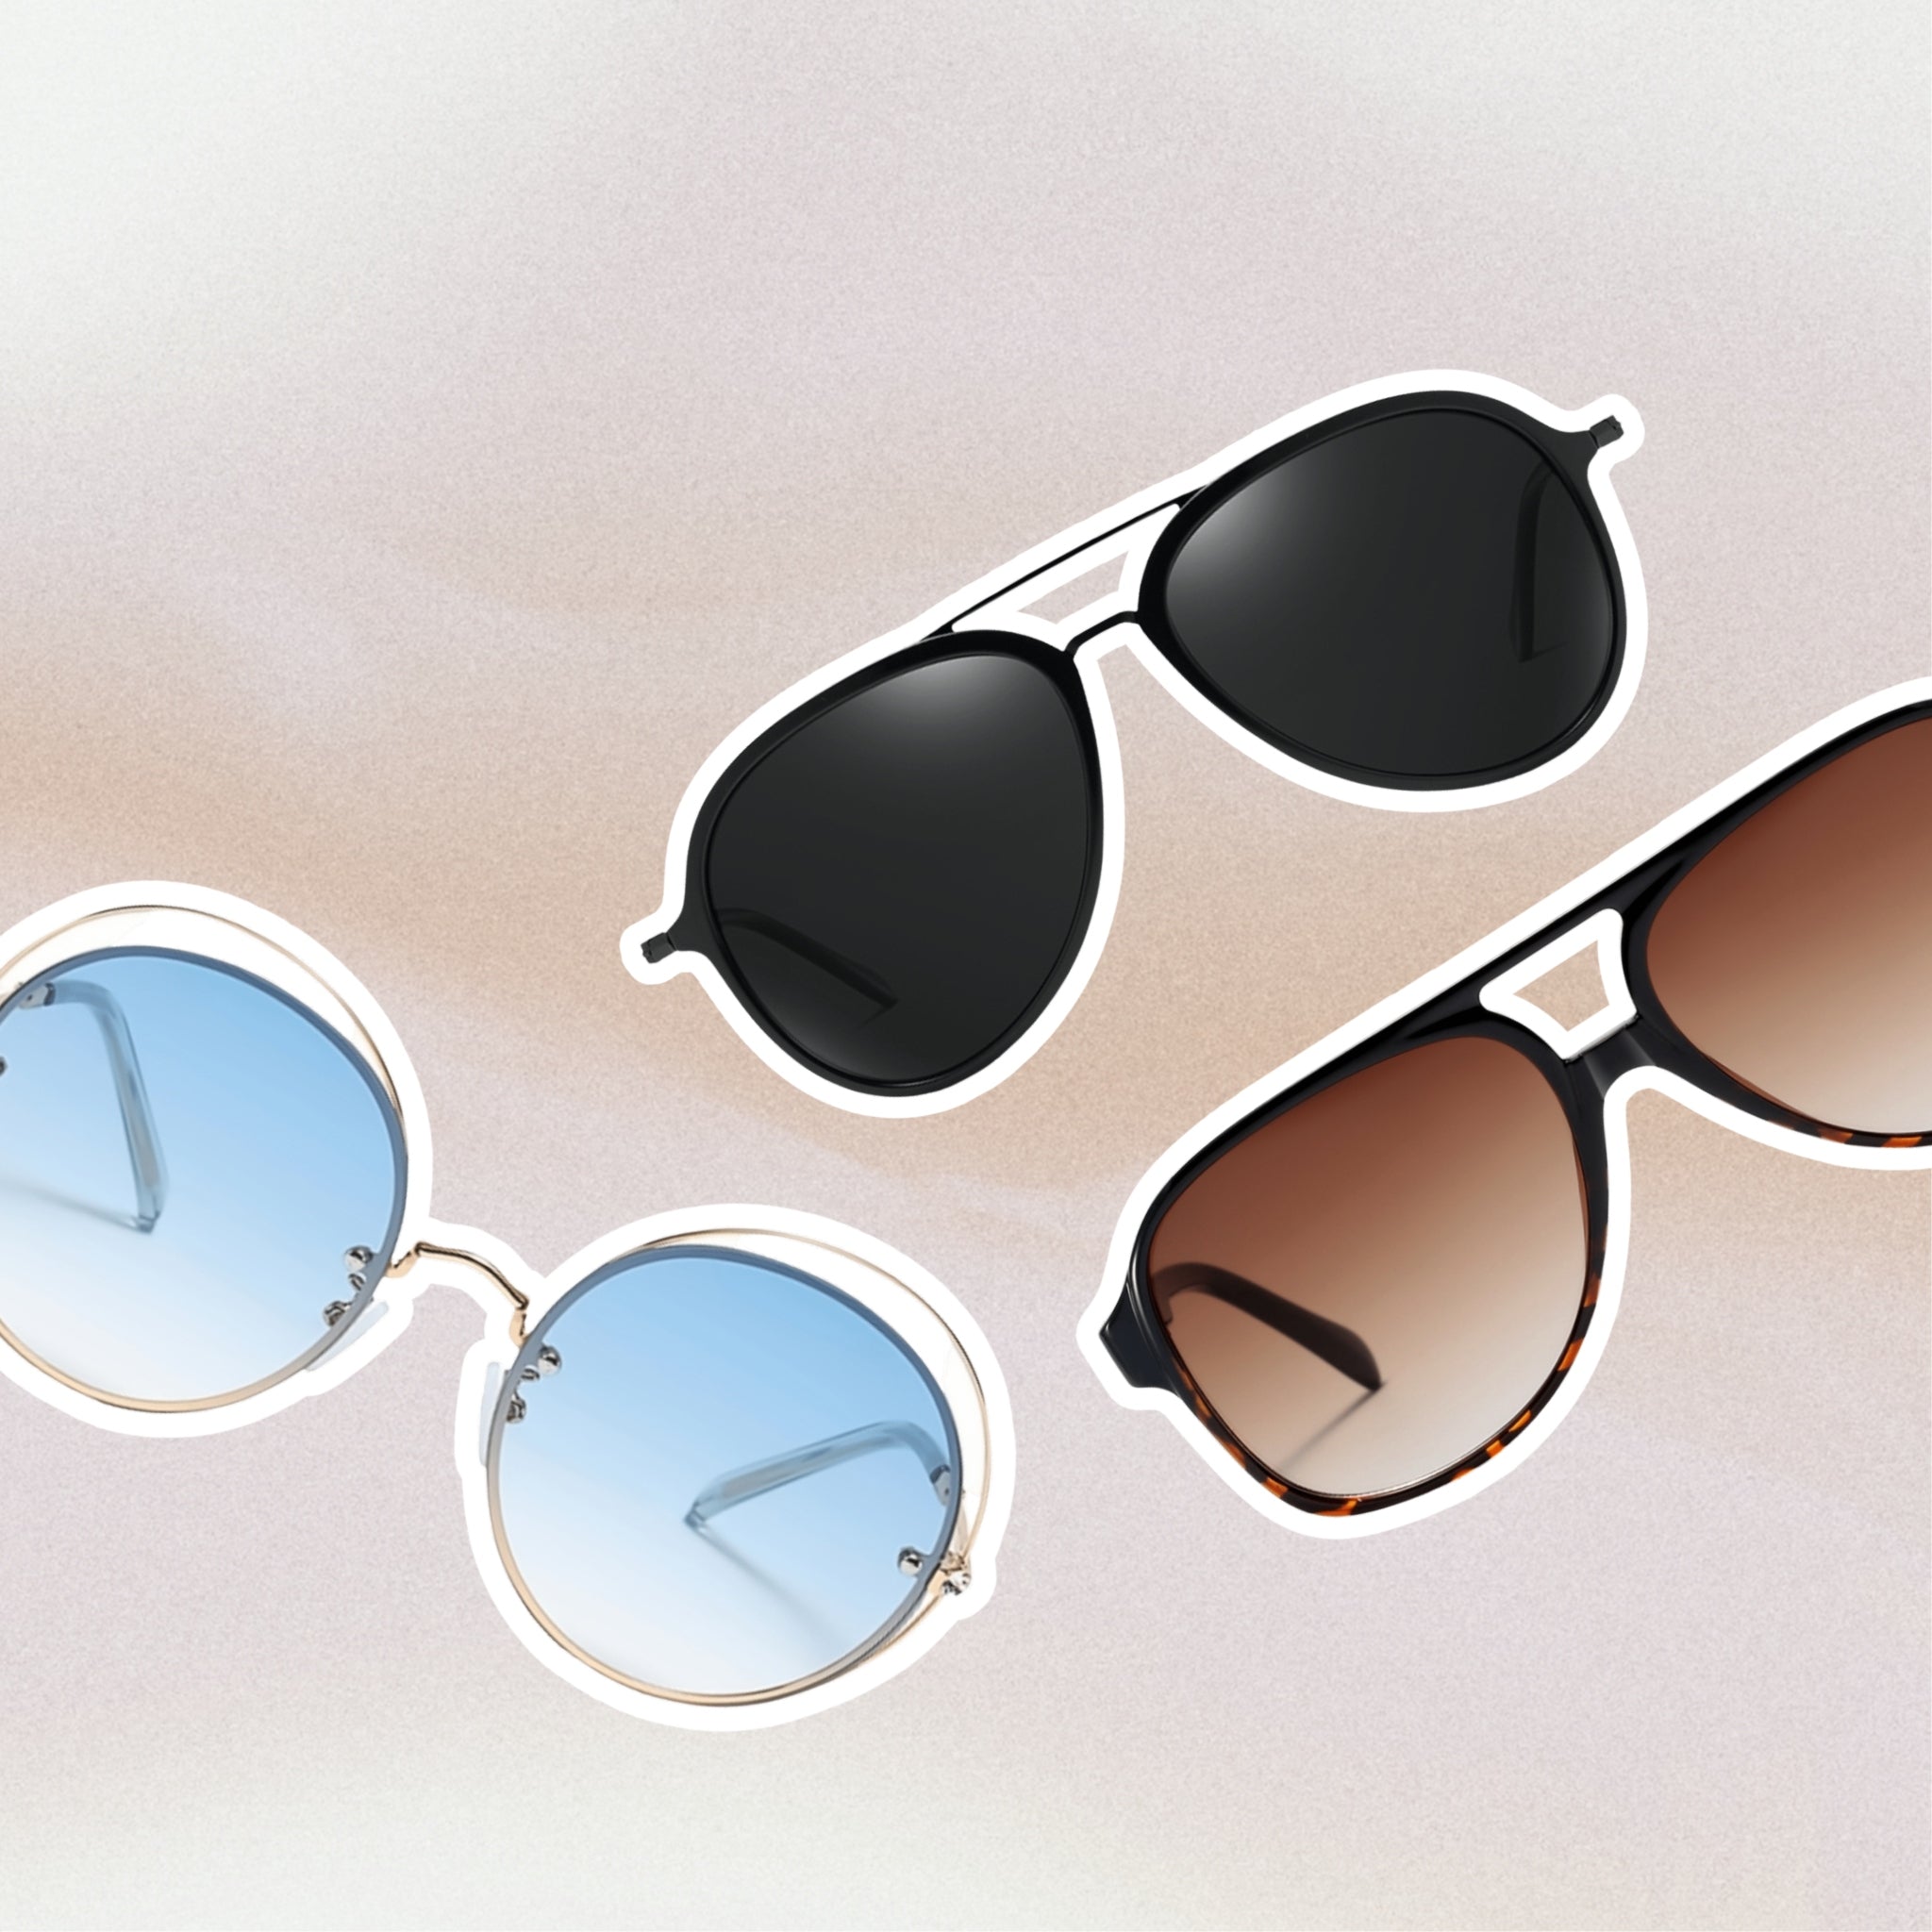 sunglasses_collection